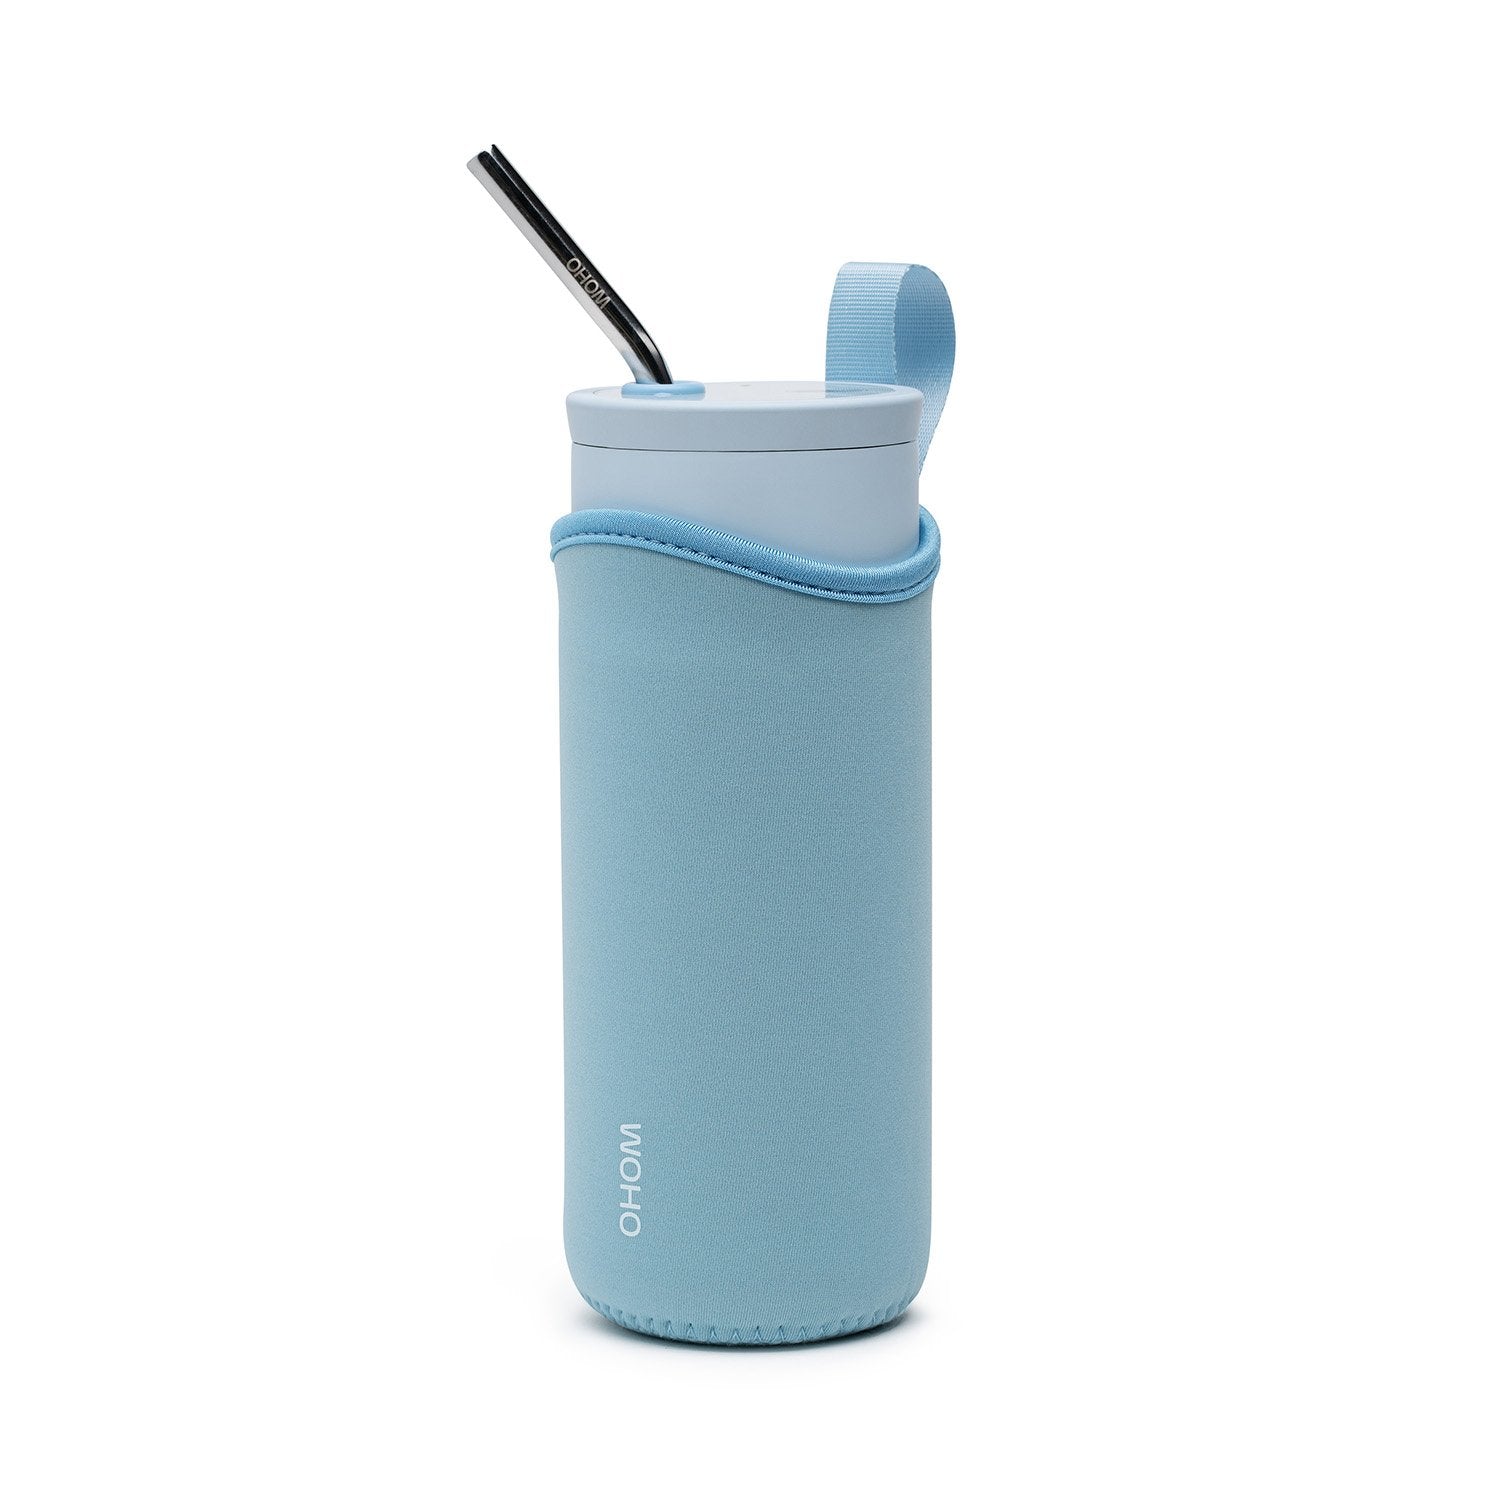 Light blue pouch with bottle and OHOM logo